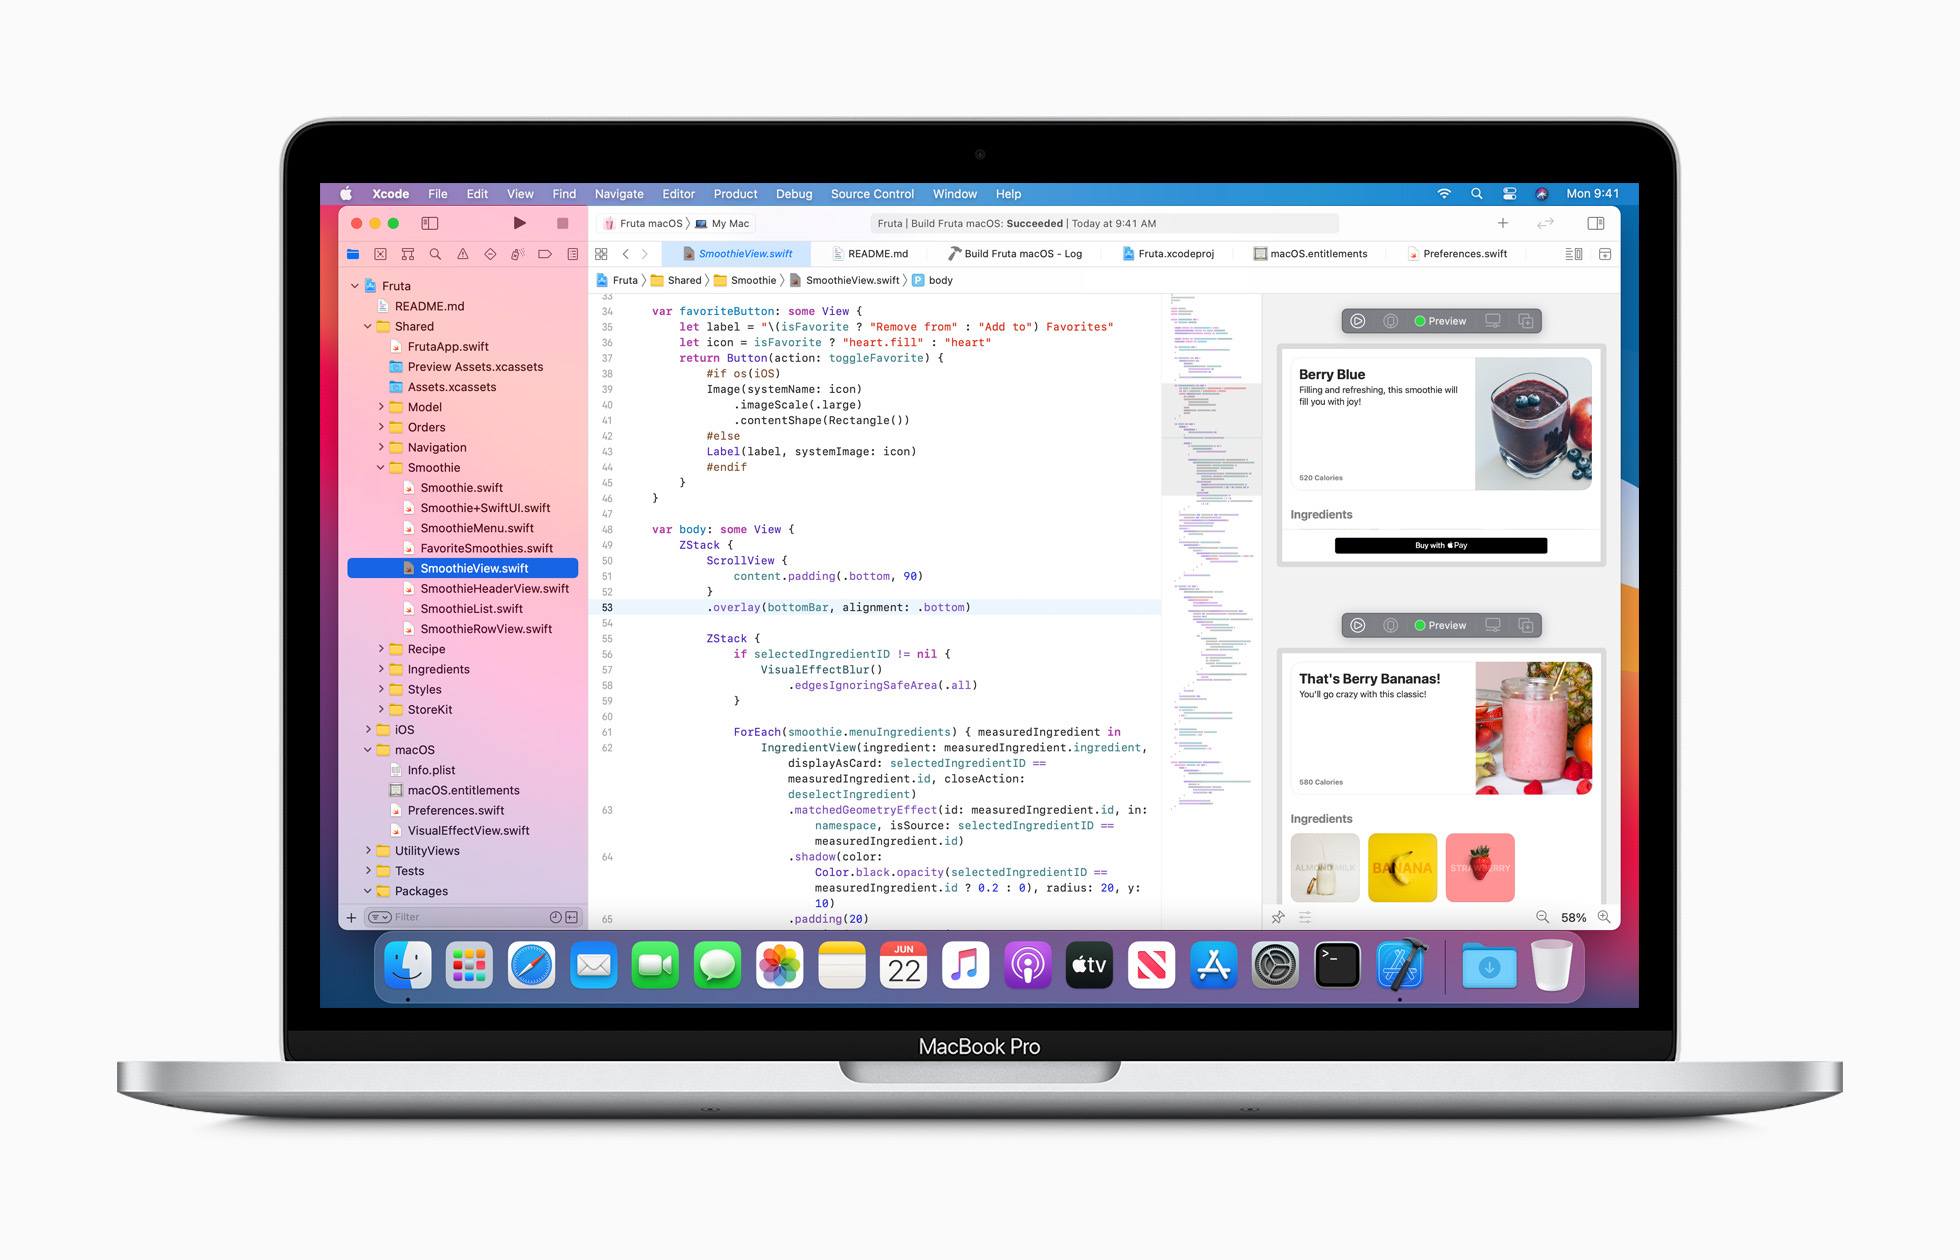 Apple says existing Mac apps can be recompiled and be ready for Apple Silicon Macs in a matter of days.